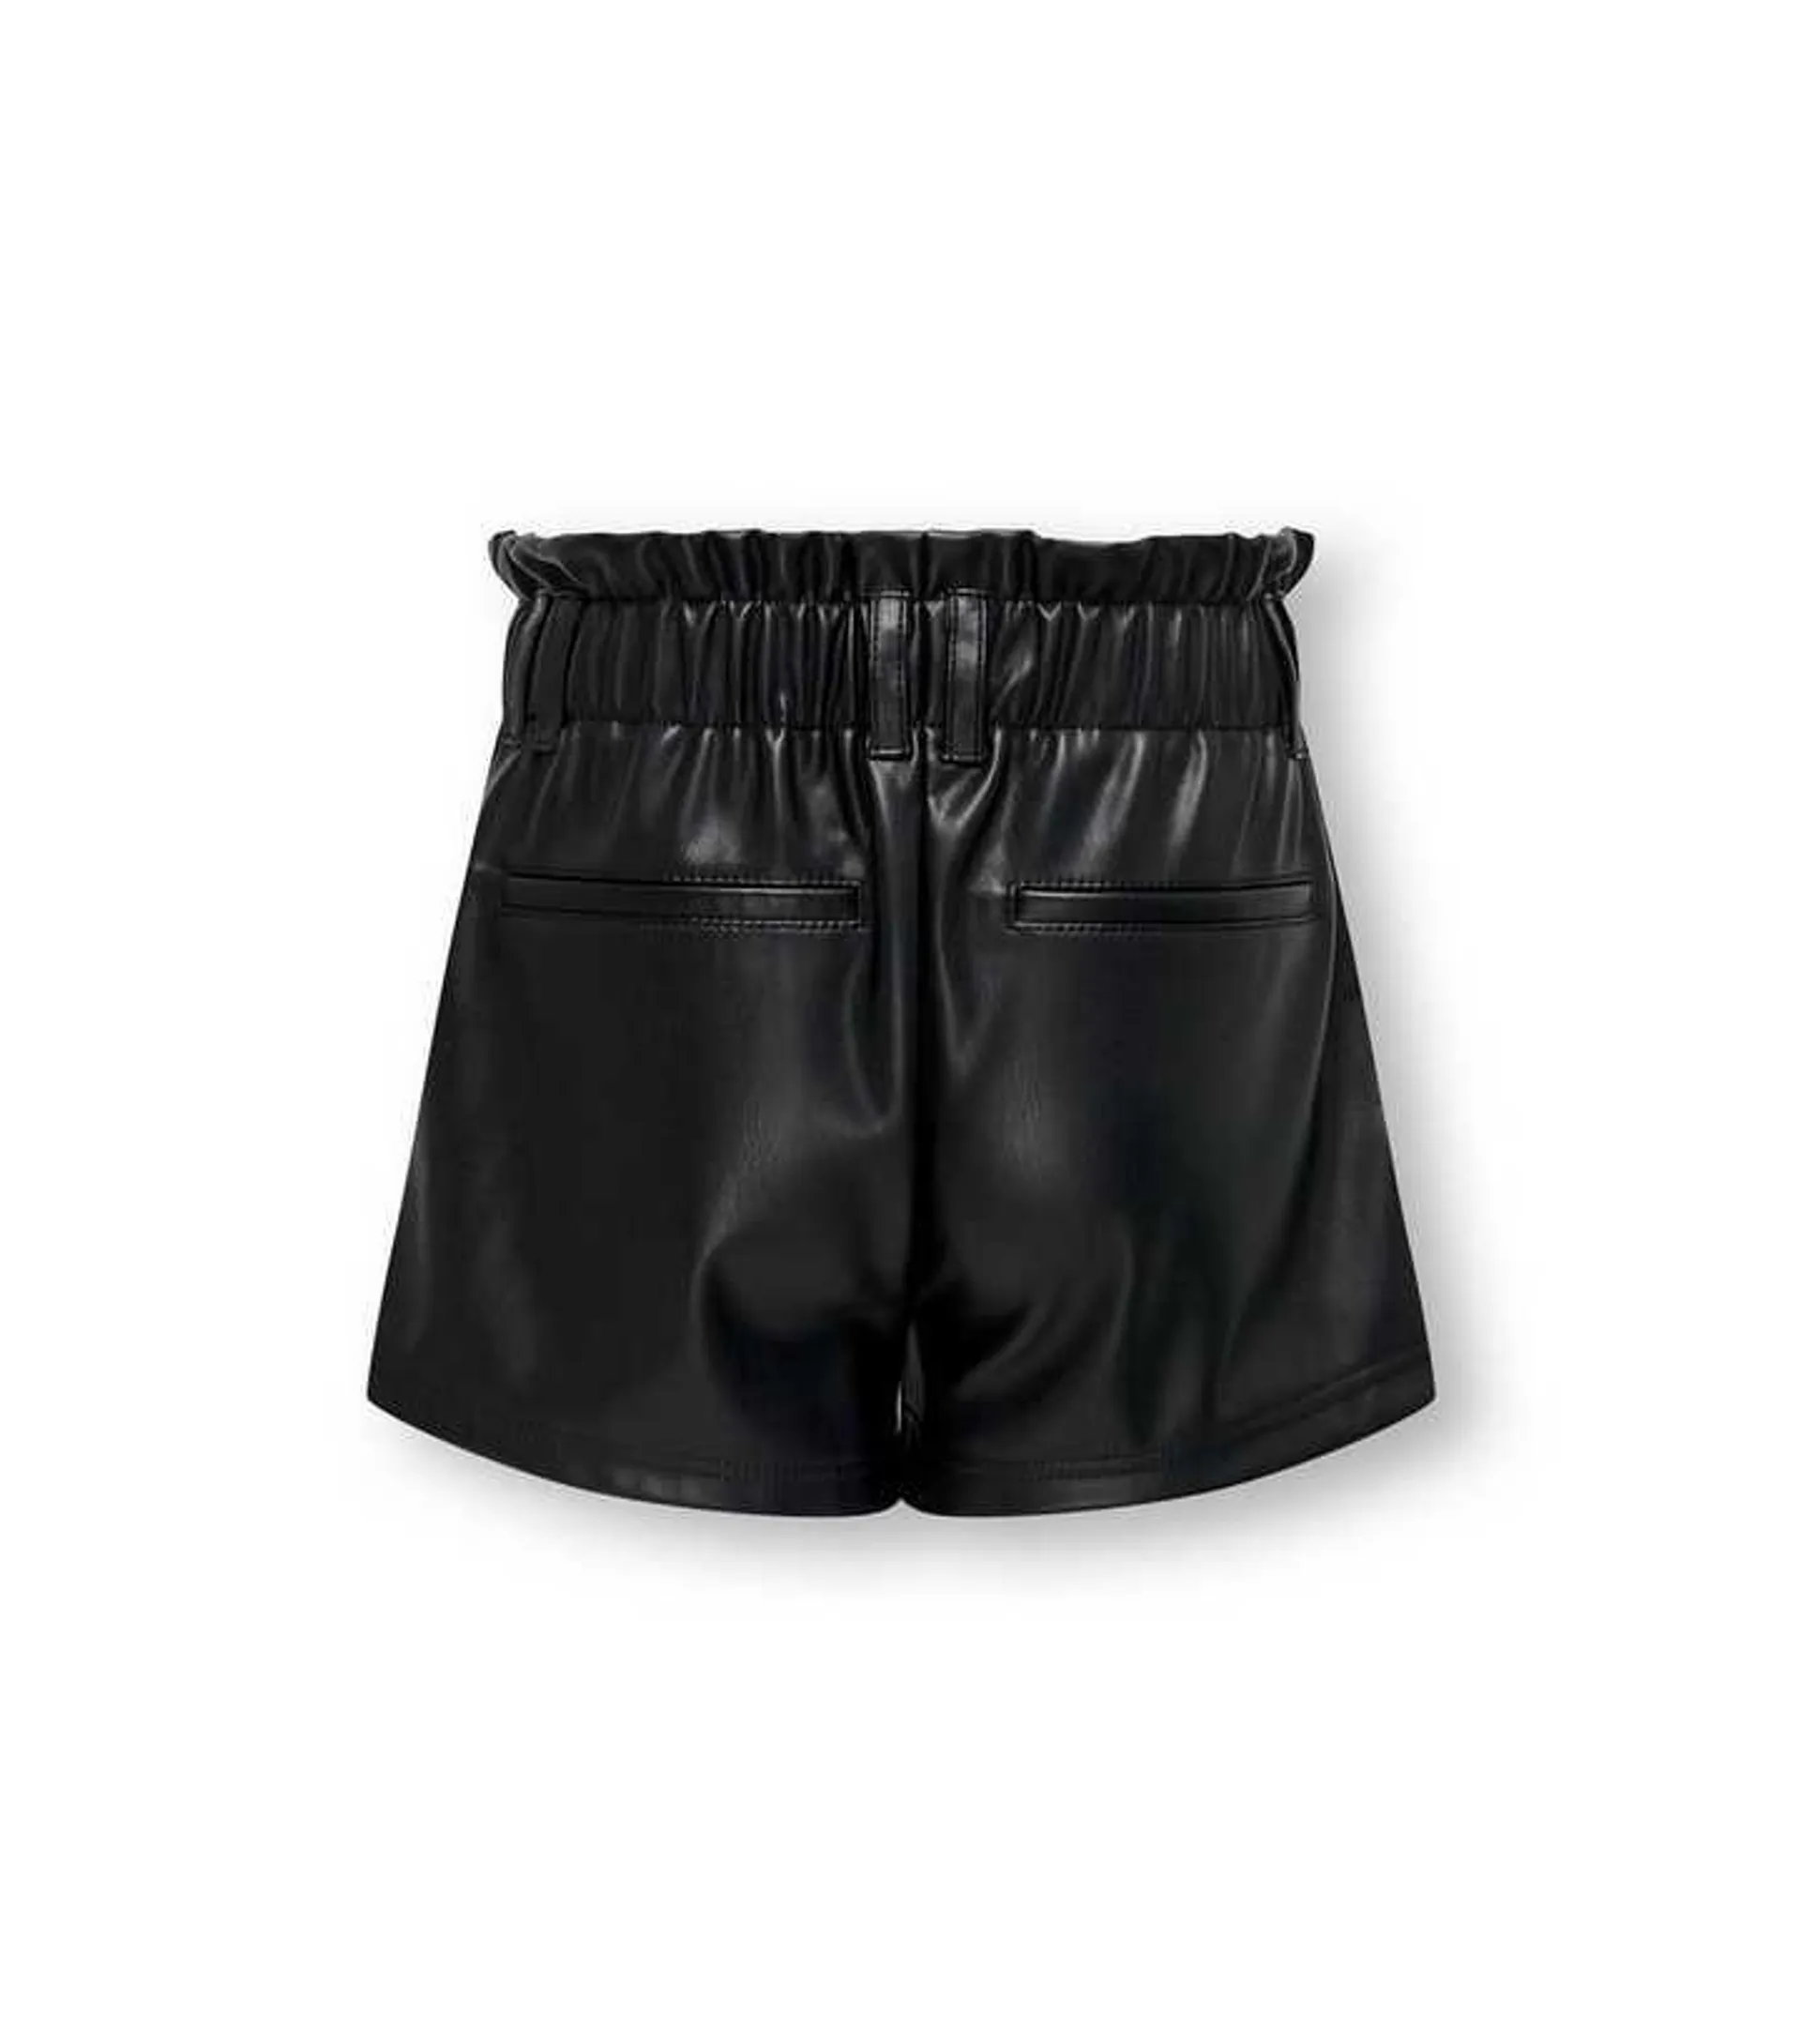 KIDS ONLY Black Leather-Look Shorts